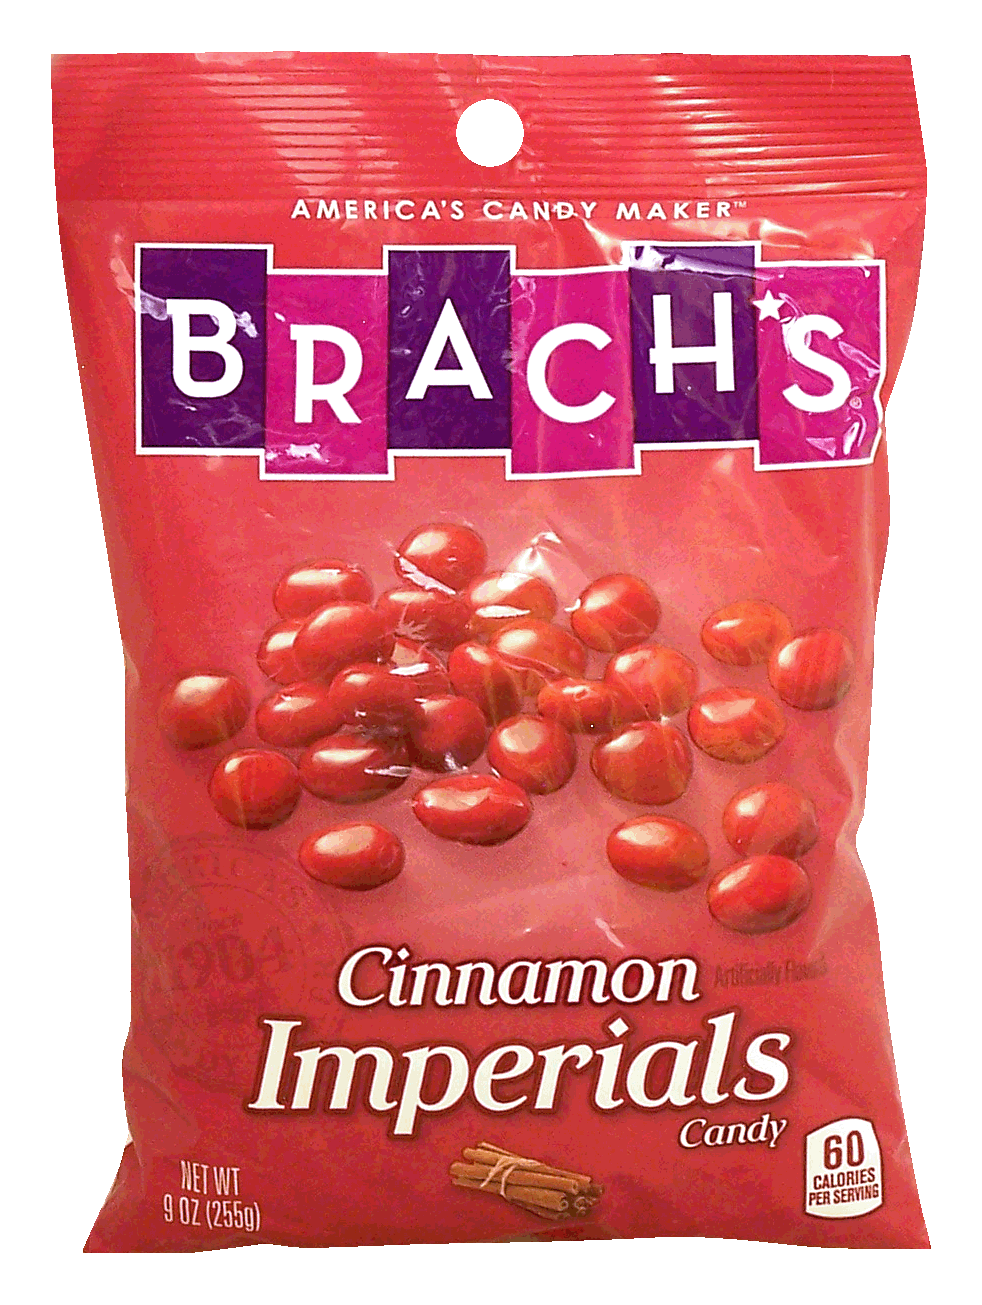 Brach's  cinnamon imperials candies; snacking, baking or decorating Full-Size Picture